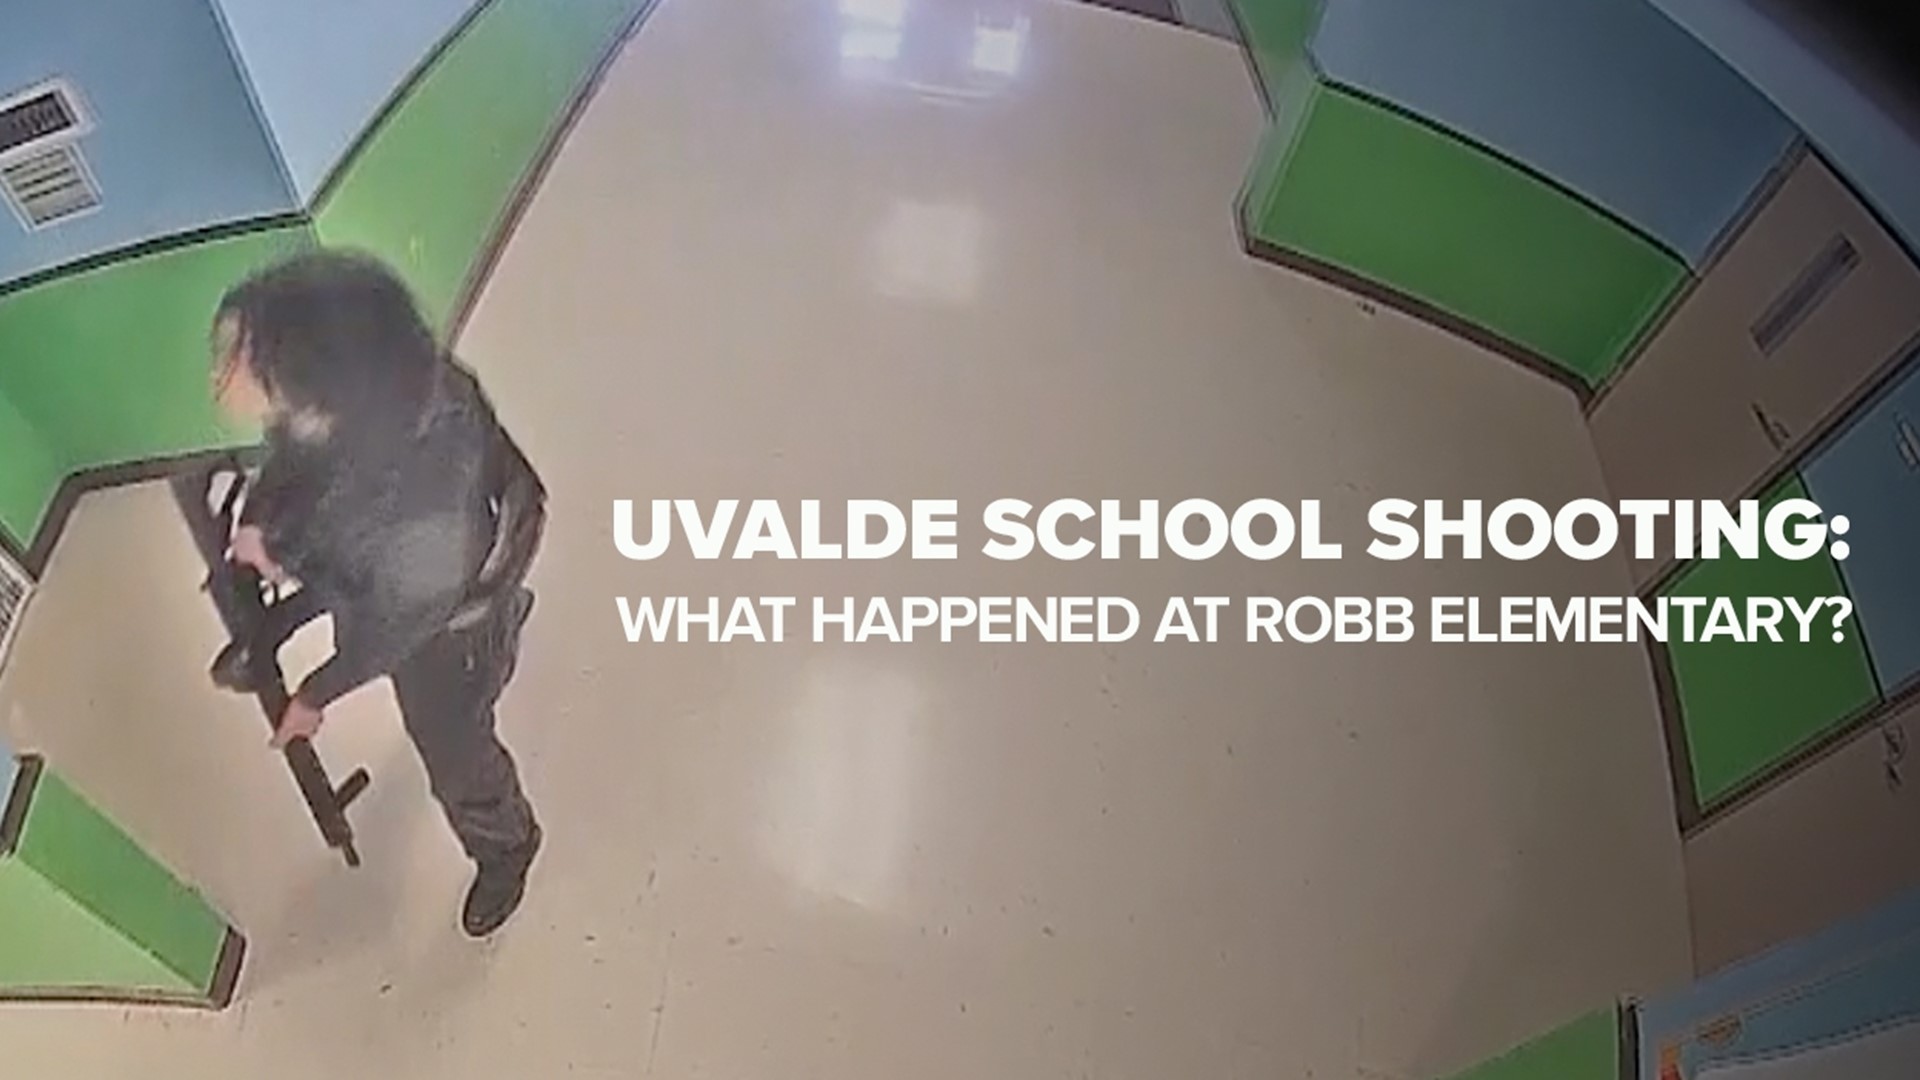 WFAA has decided to release the footage from Uvalde, obtained by our sister station KVUE in Austin, to provide transparency to the community and show what happened.